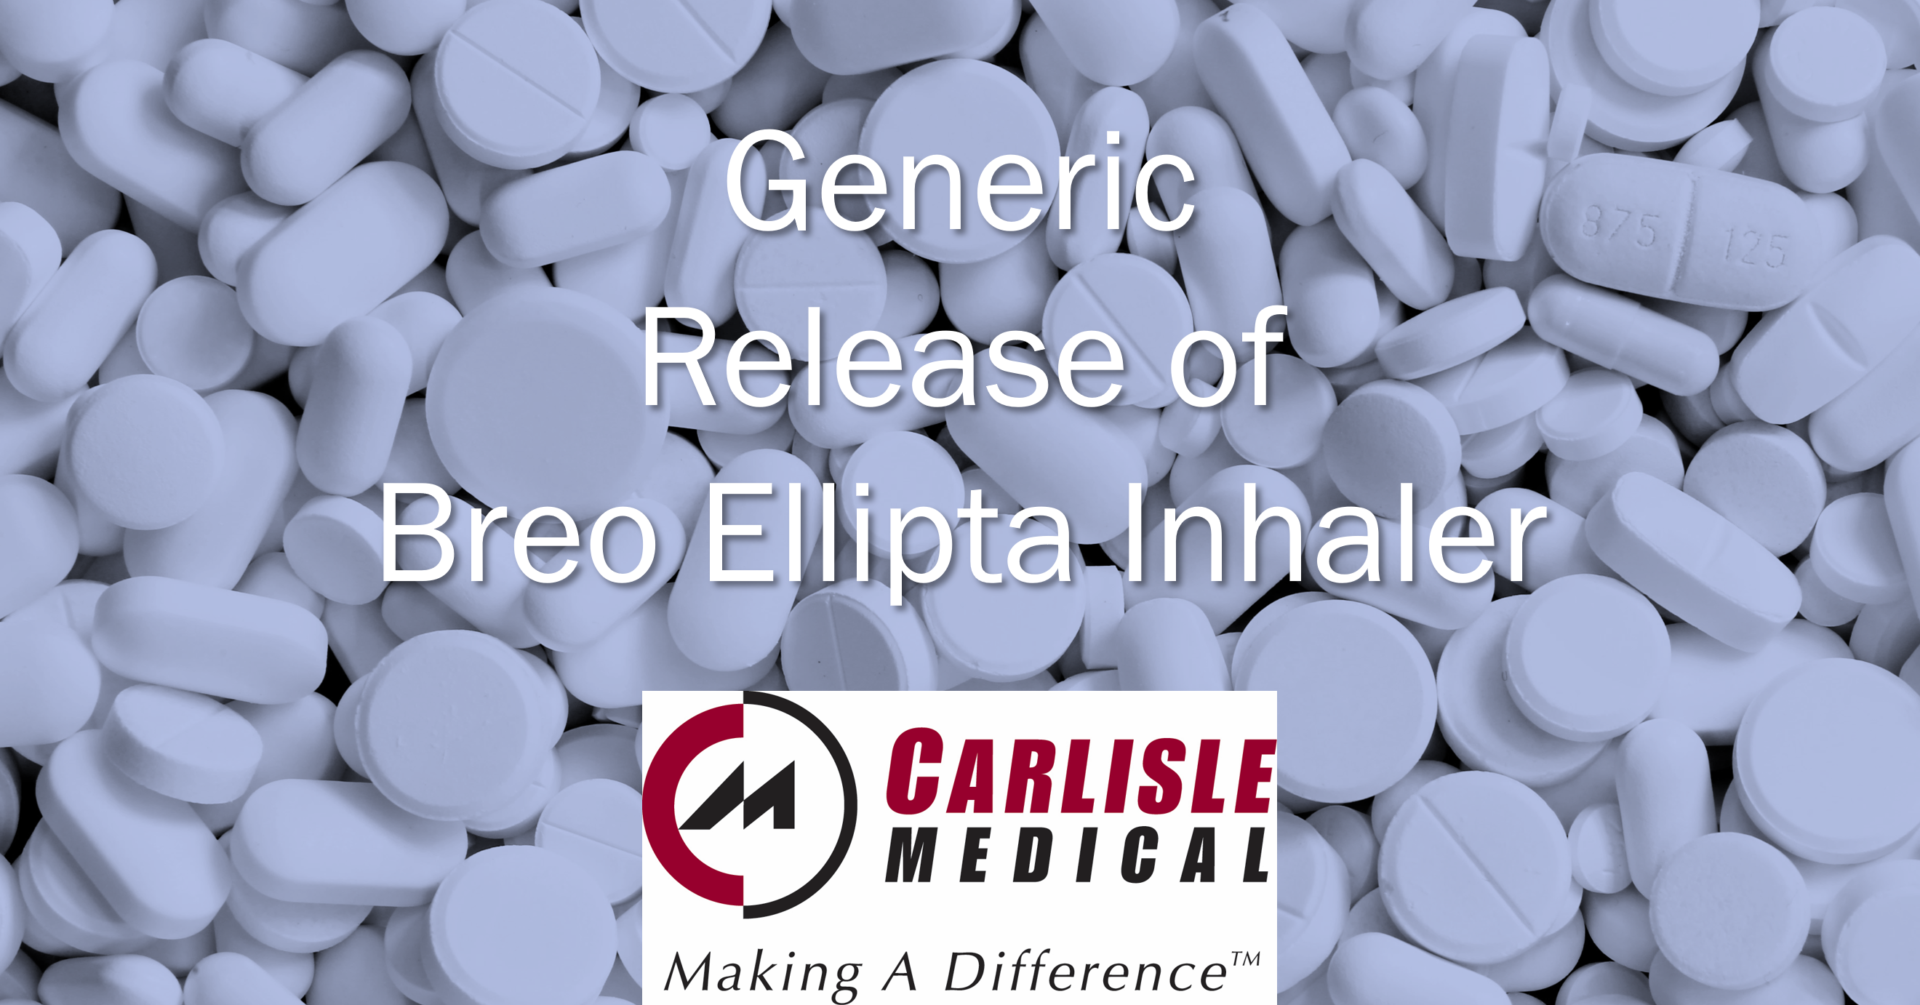 Generic Release Of Breo Ellipta Inhaler Is Now Available